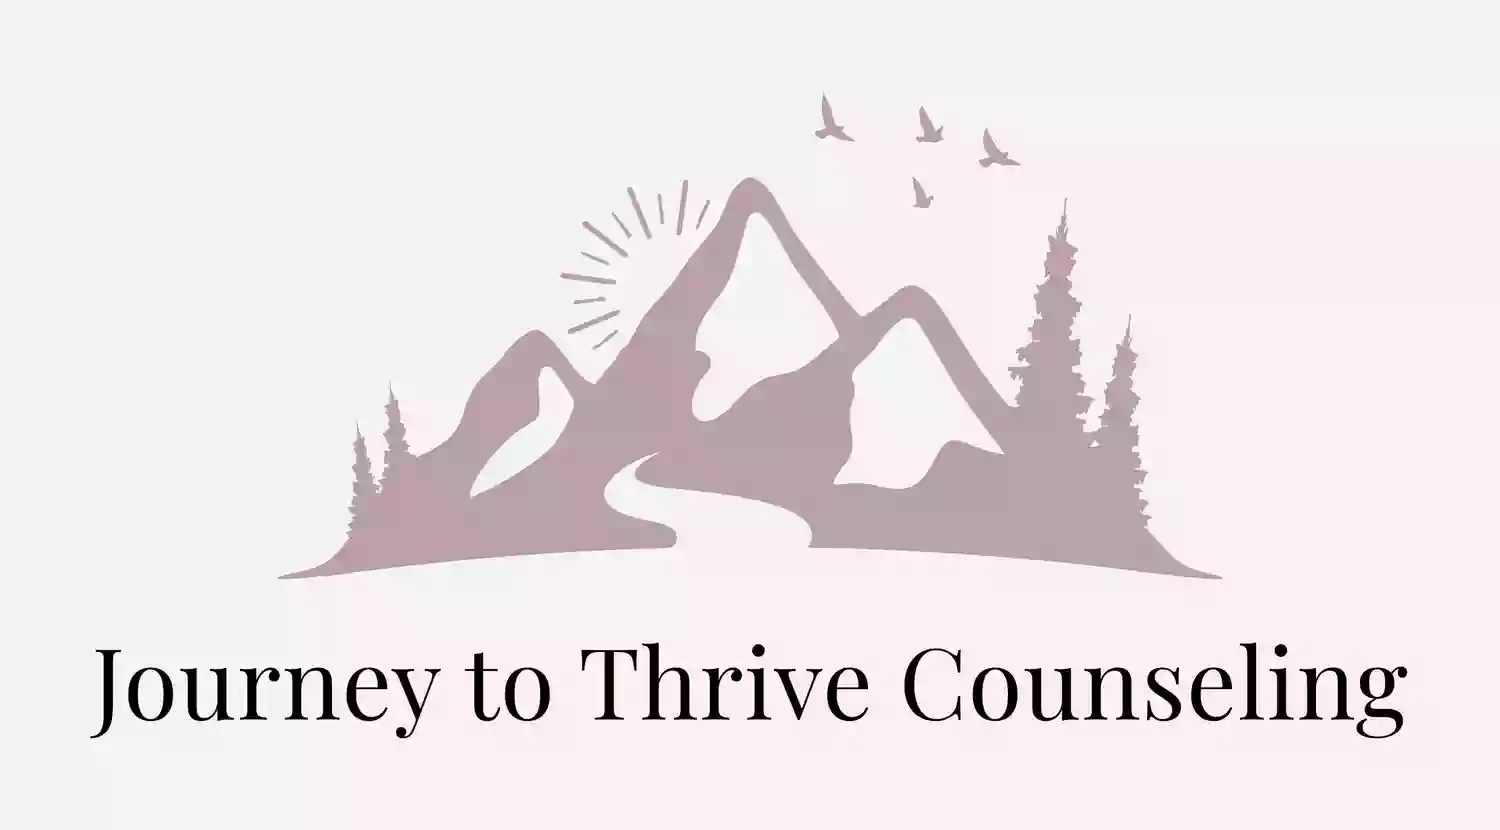 Journey to Thrive Counseling